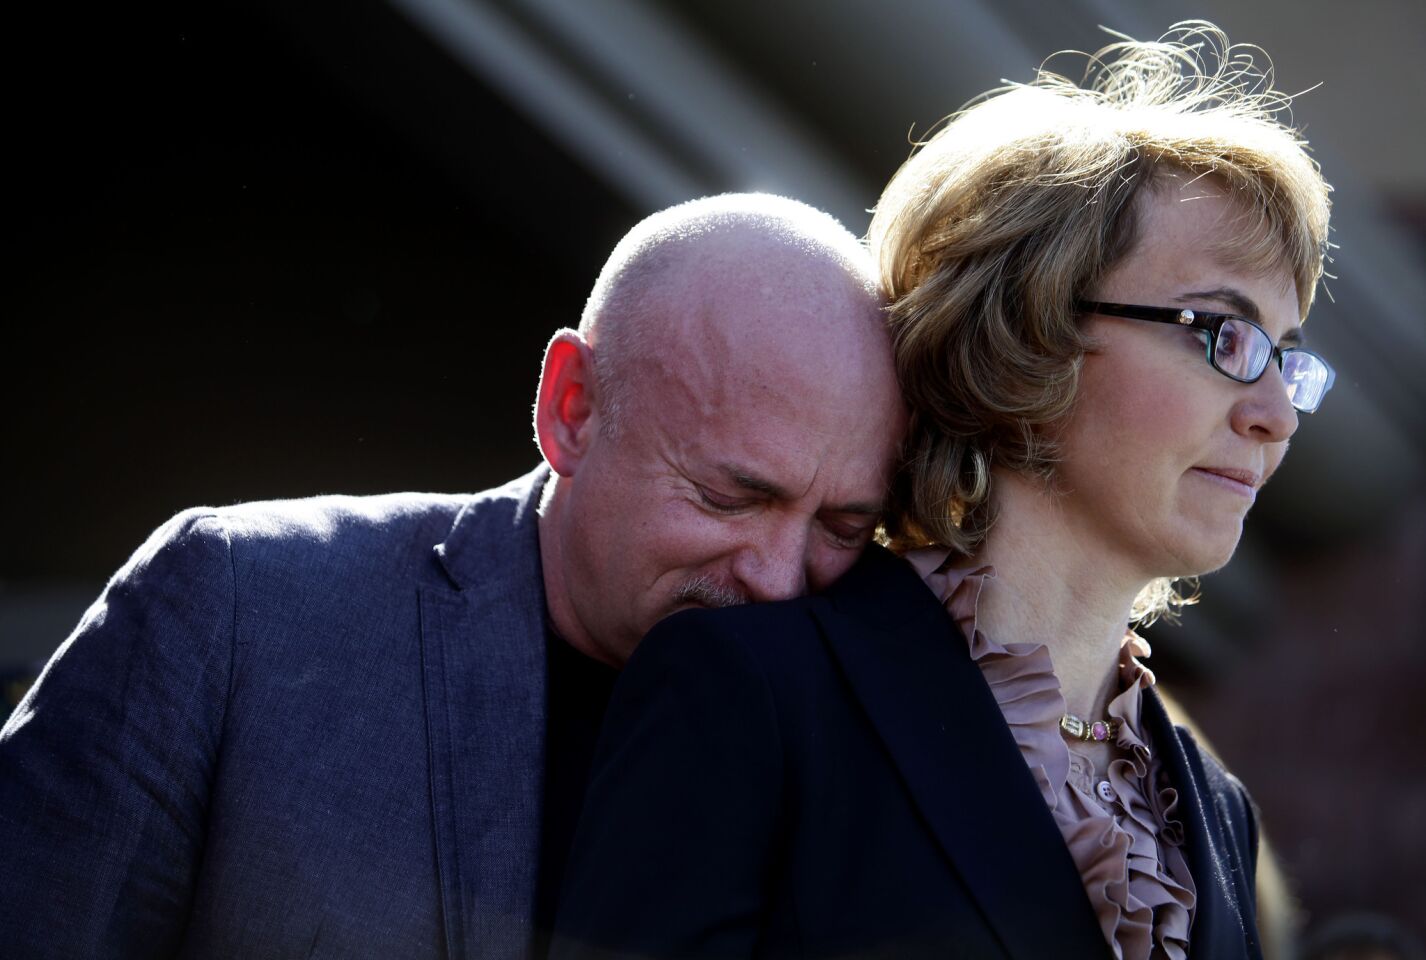 Mark Kelly leans his head on the shoulder of his wife, former U.S. Rep. Gabby Giffords as they attend a Tucson news conference asking Congress to pass stricter gun control laws.